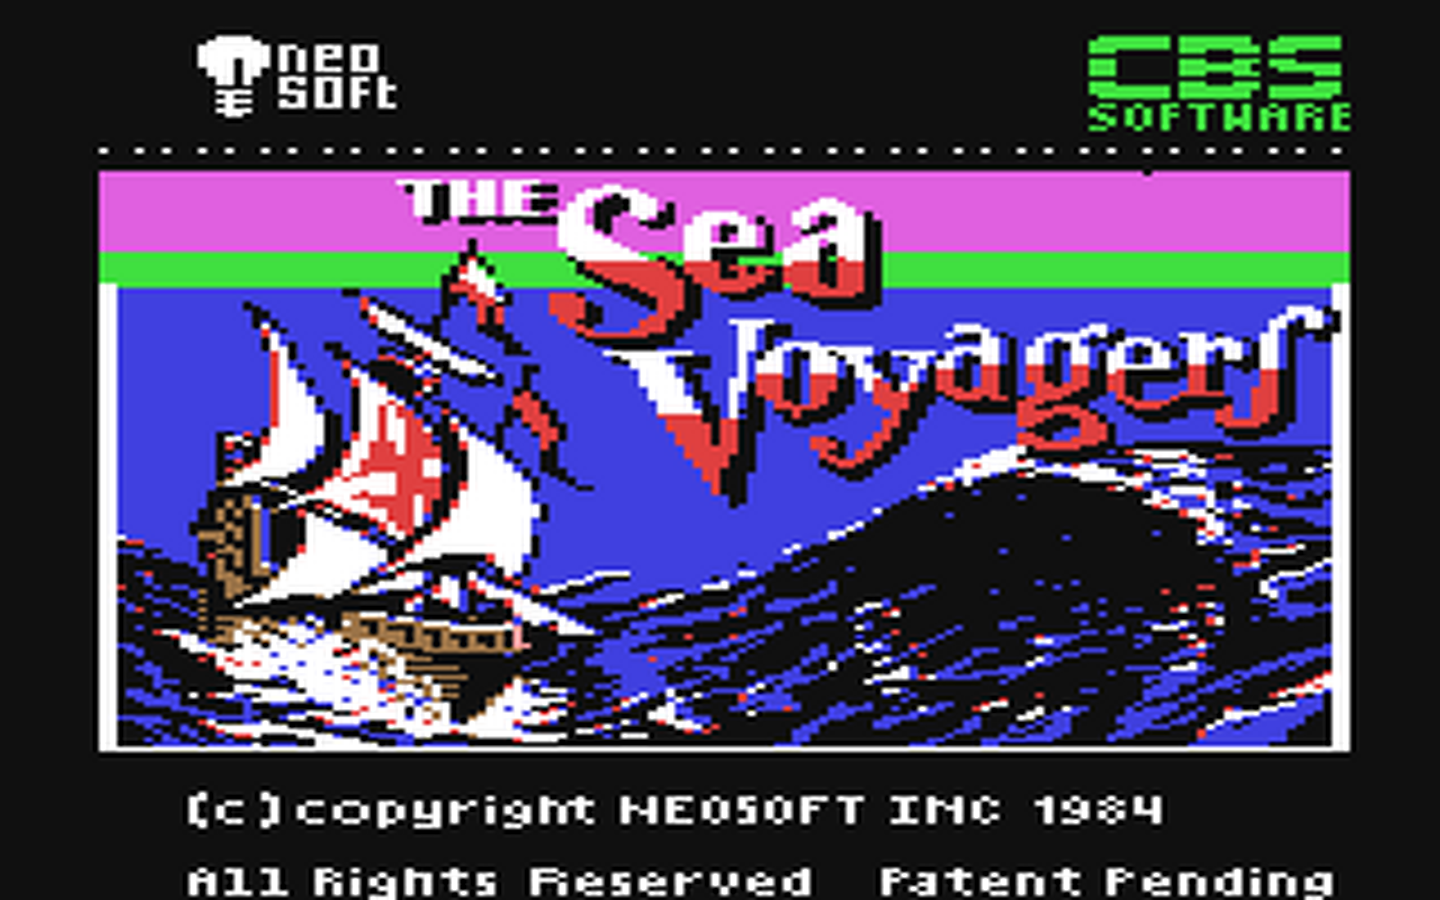 C64 GameBase Sea_Voyagers,_The CBS_Software 1984